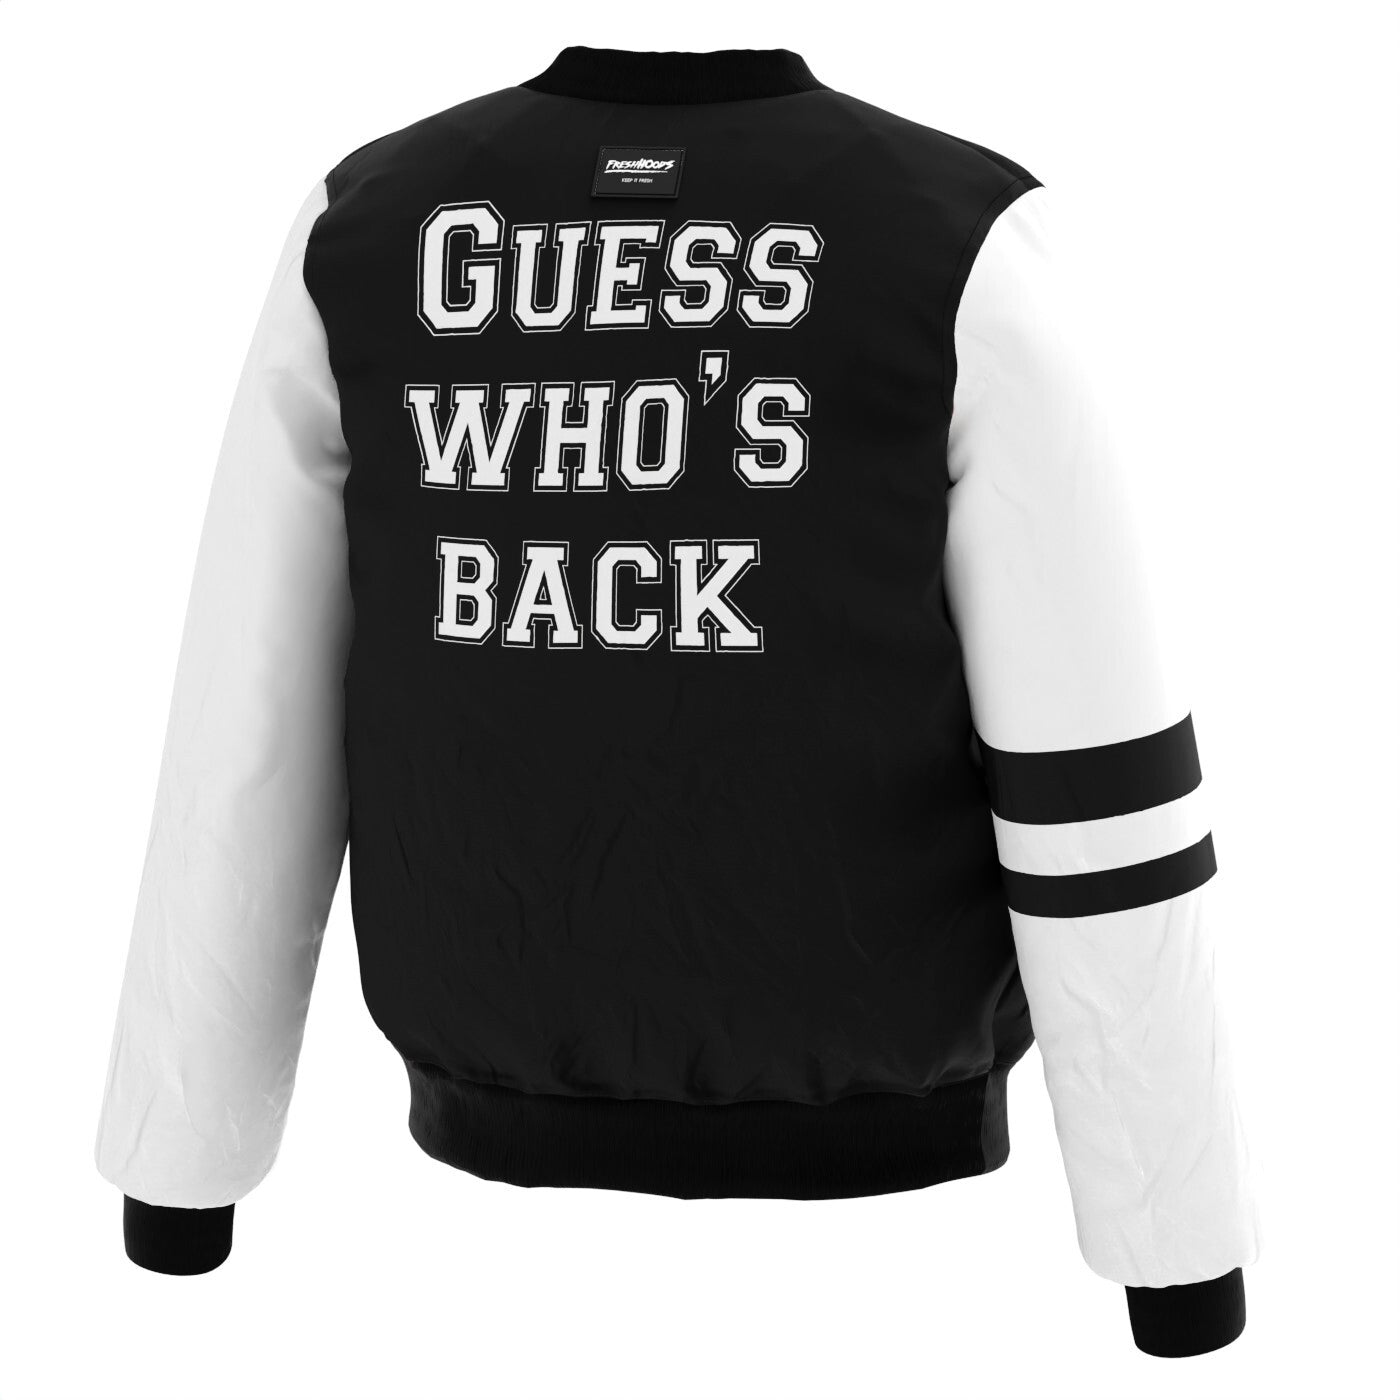 Back In The Game Bomber Jacket